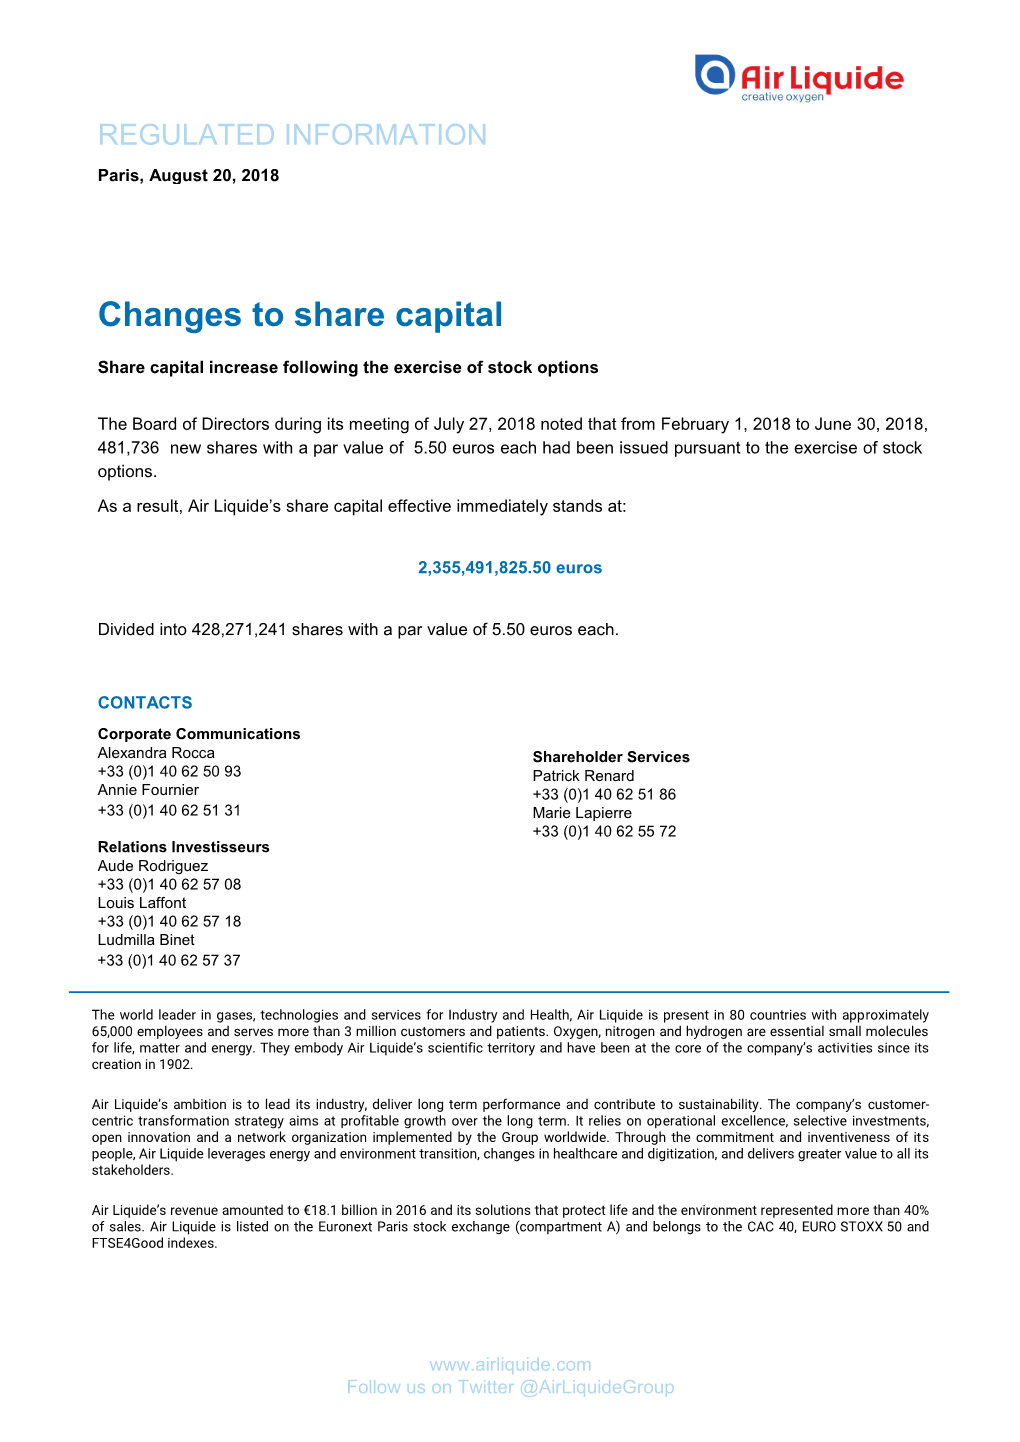 Air Liquide’S Share Capital Effective Immediately Stands At